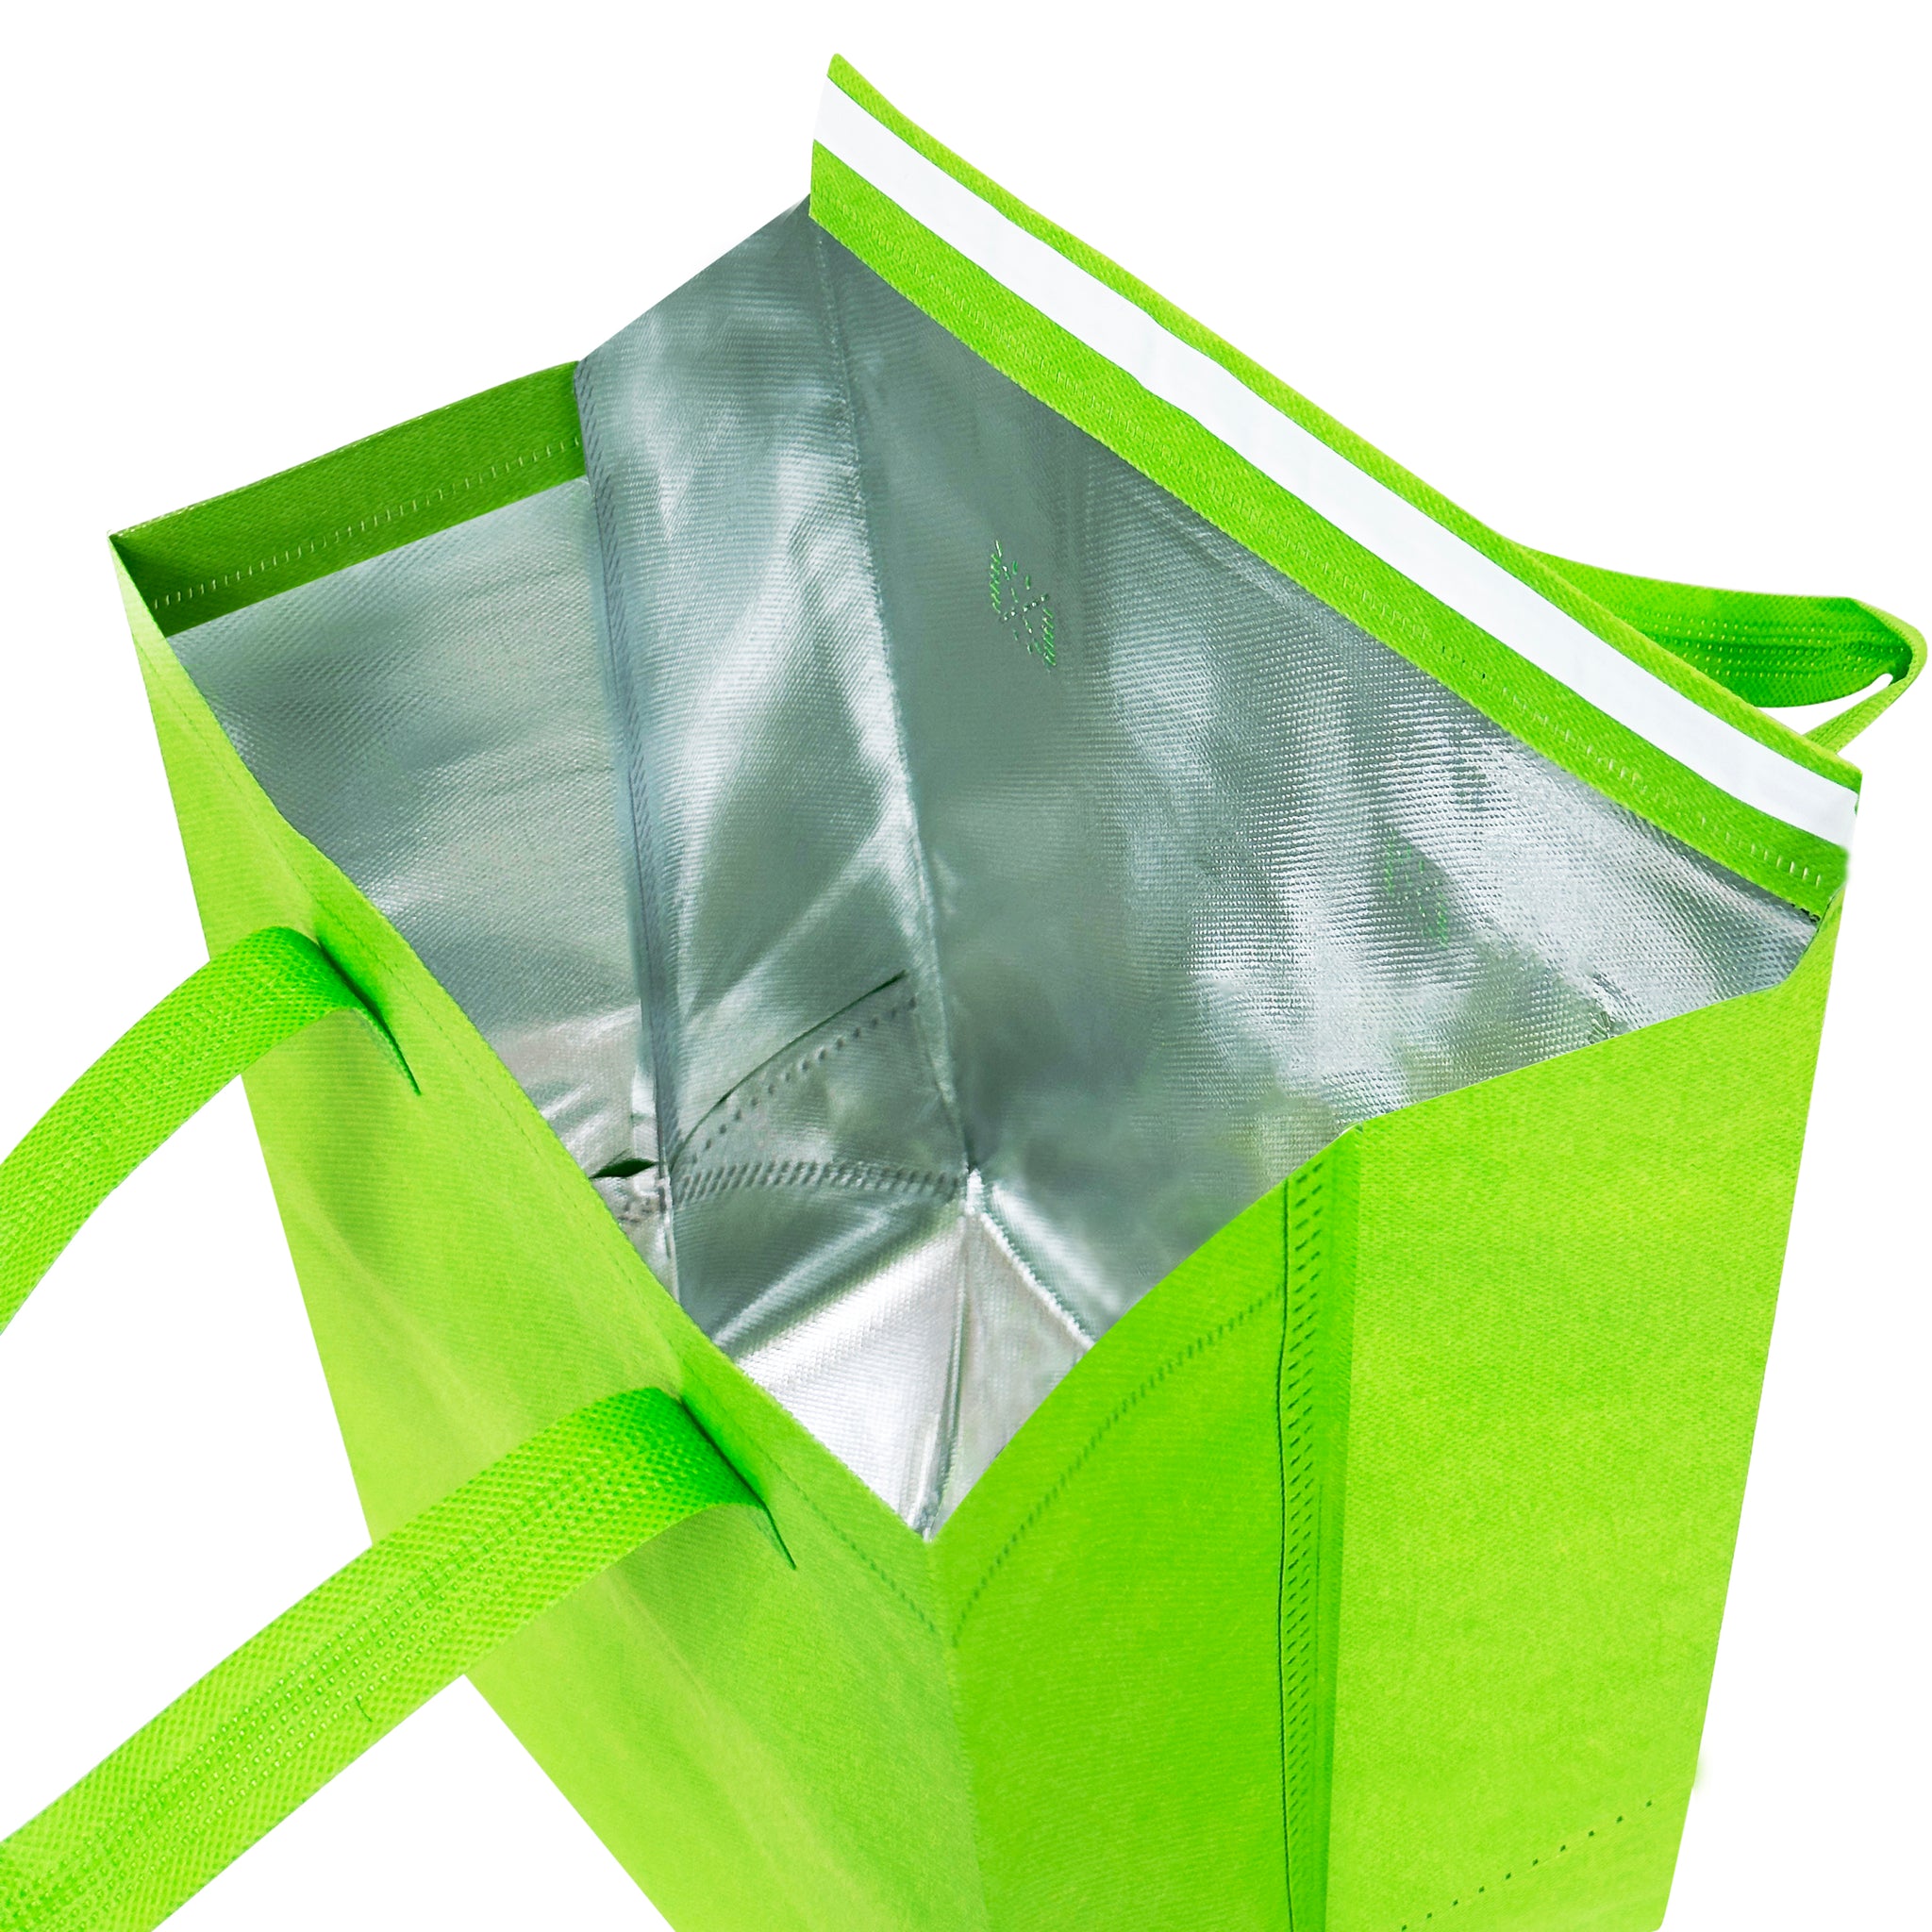 A green thermal bag with a zipper